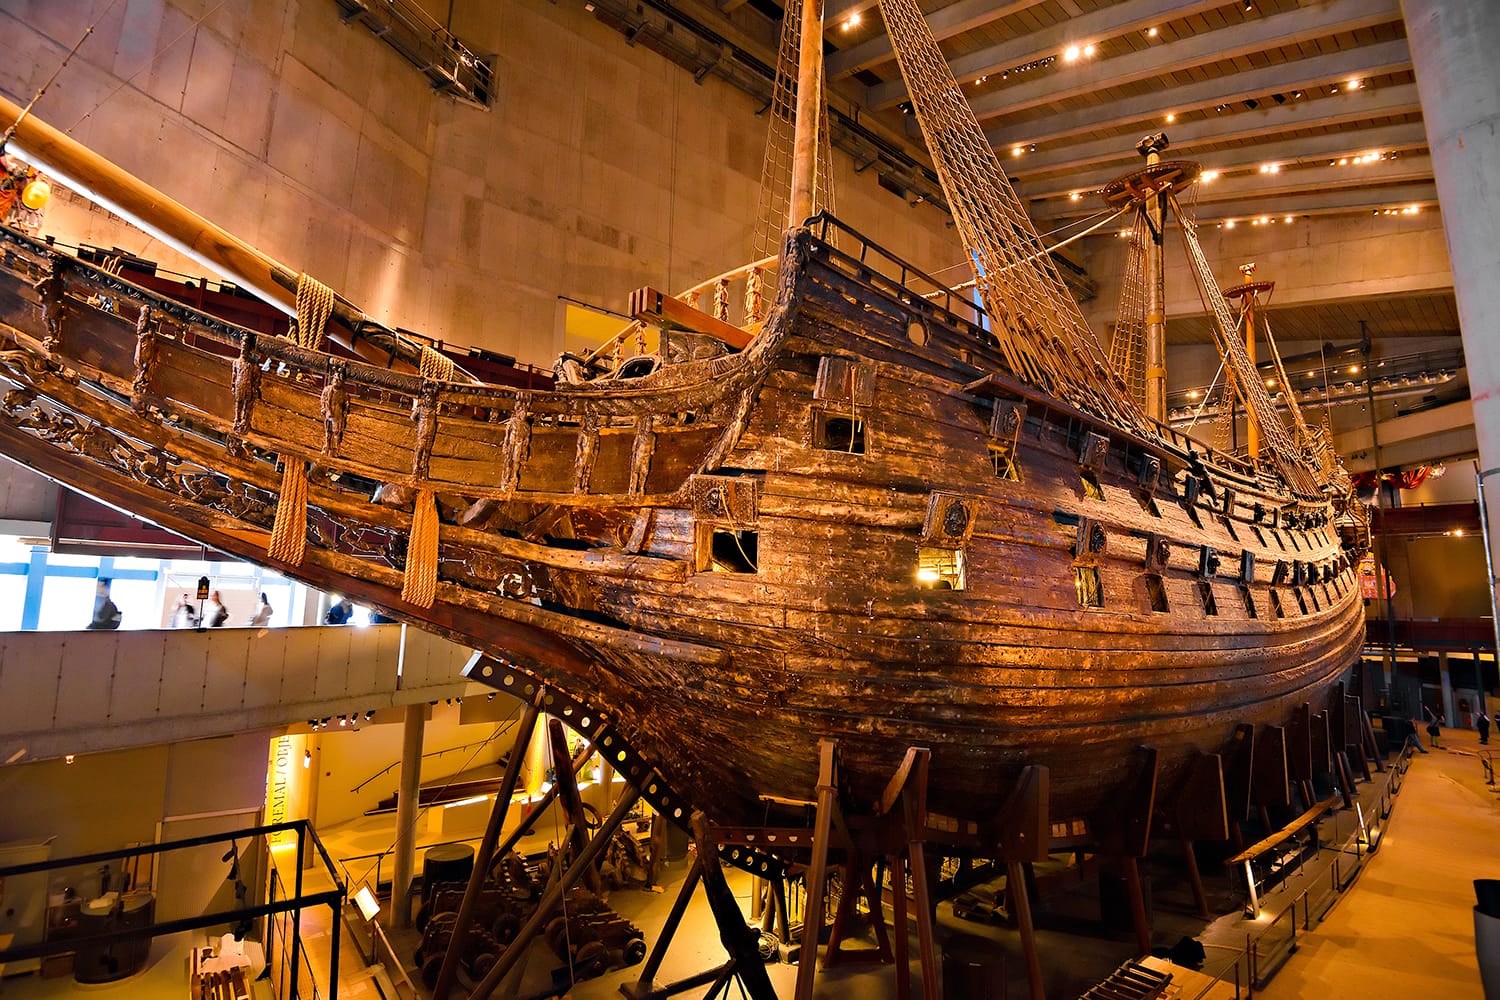 The Vasa warship salvaged from the sea and displayed at Vasa Museum in Stockholm, Sweden